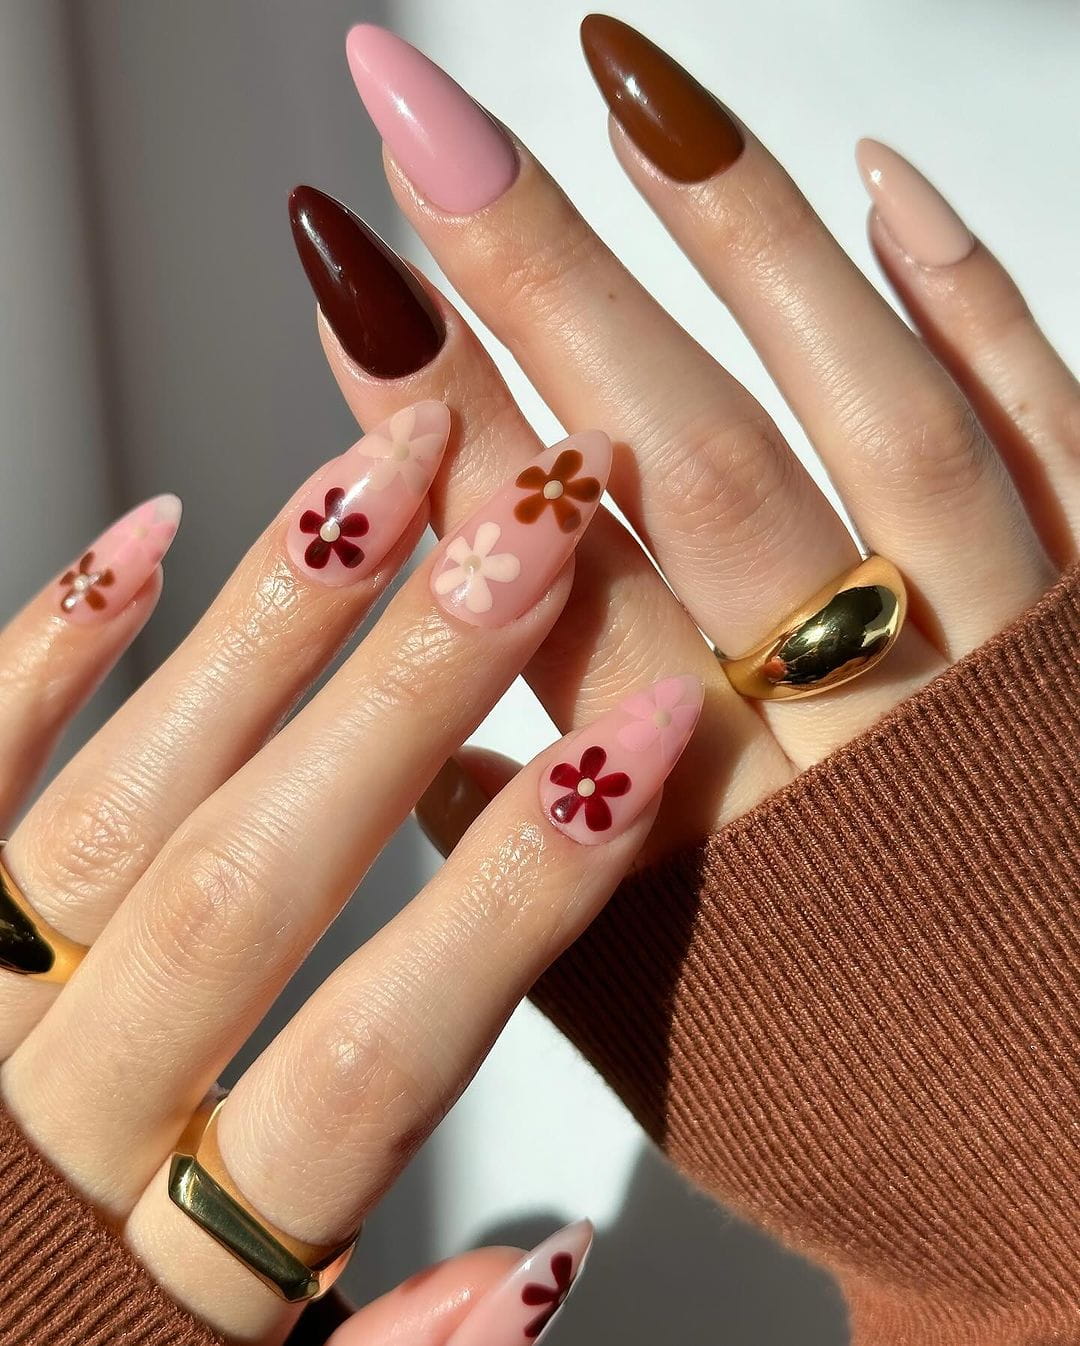 100+ Best Winter Nail Ideas And Designs To Try images 8